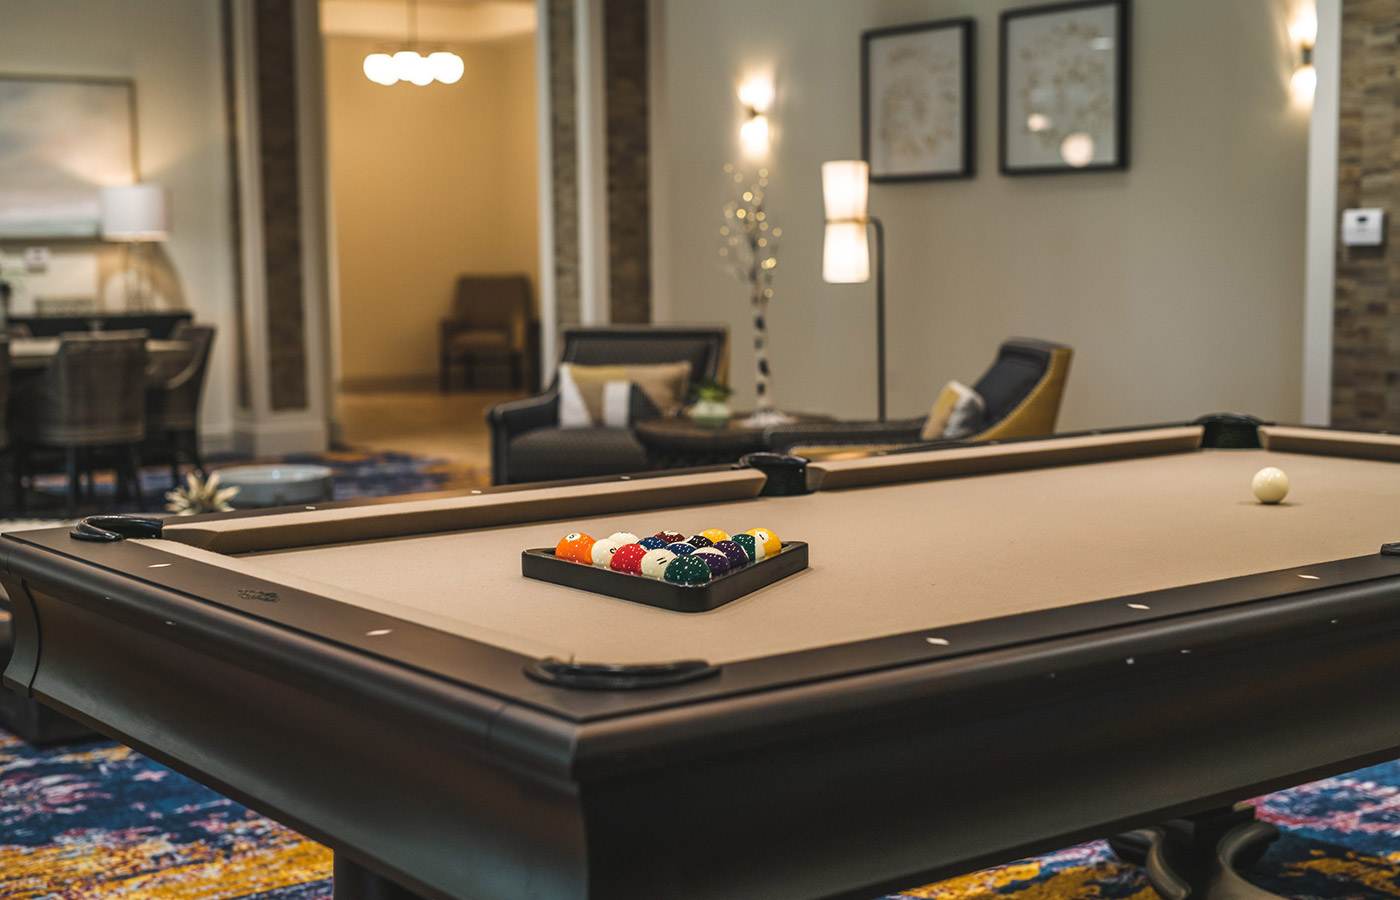 A pool table.